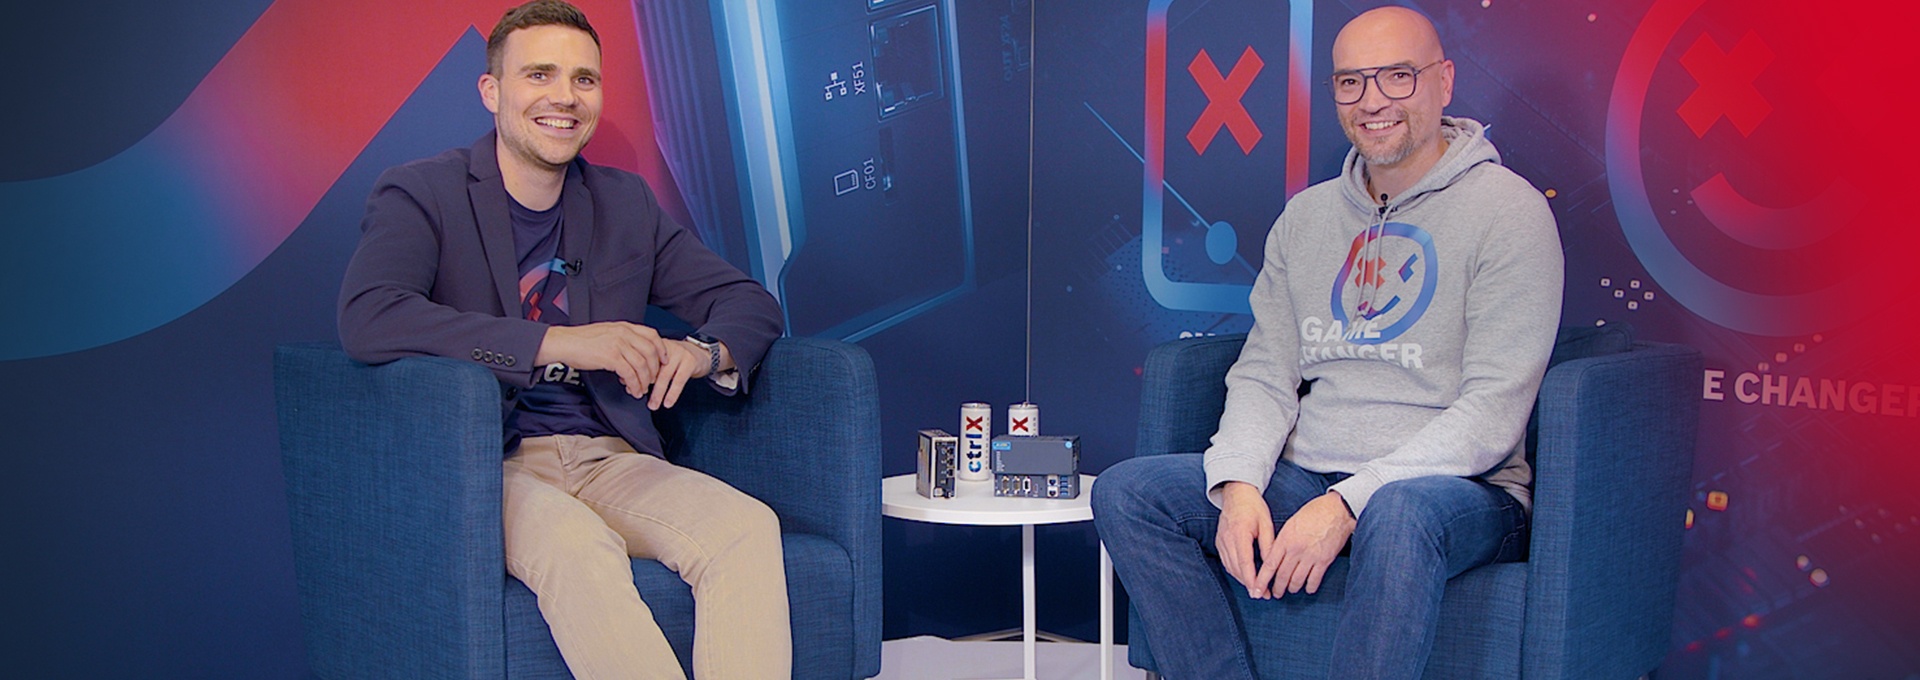 Host Christian Zentraf and his guest Johannes Albrecht talk about the Linux-based operating system ctrlX OS.